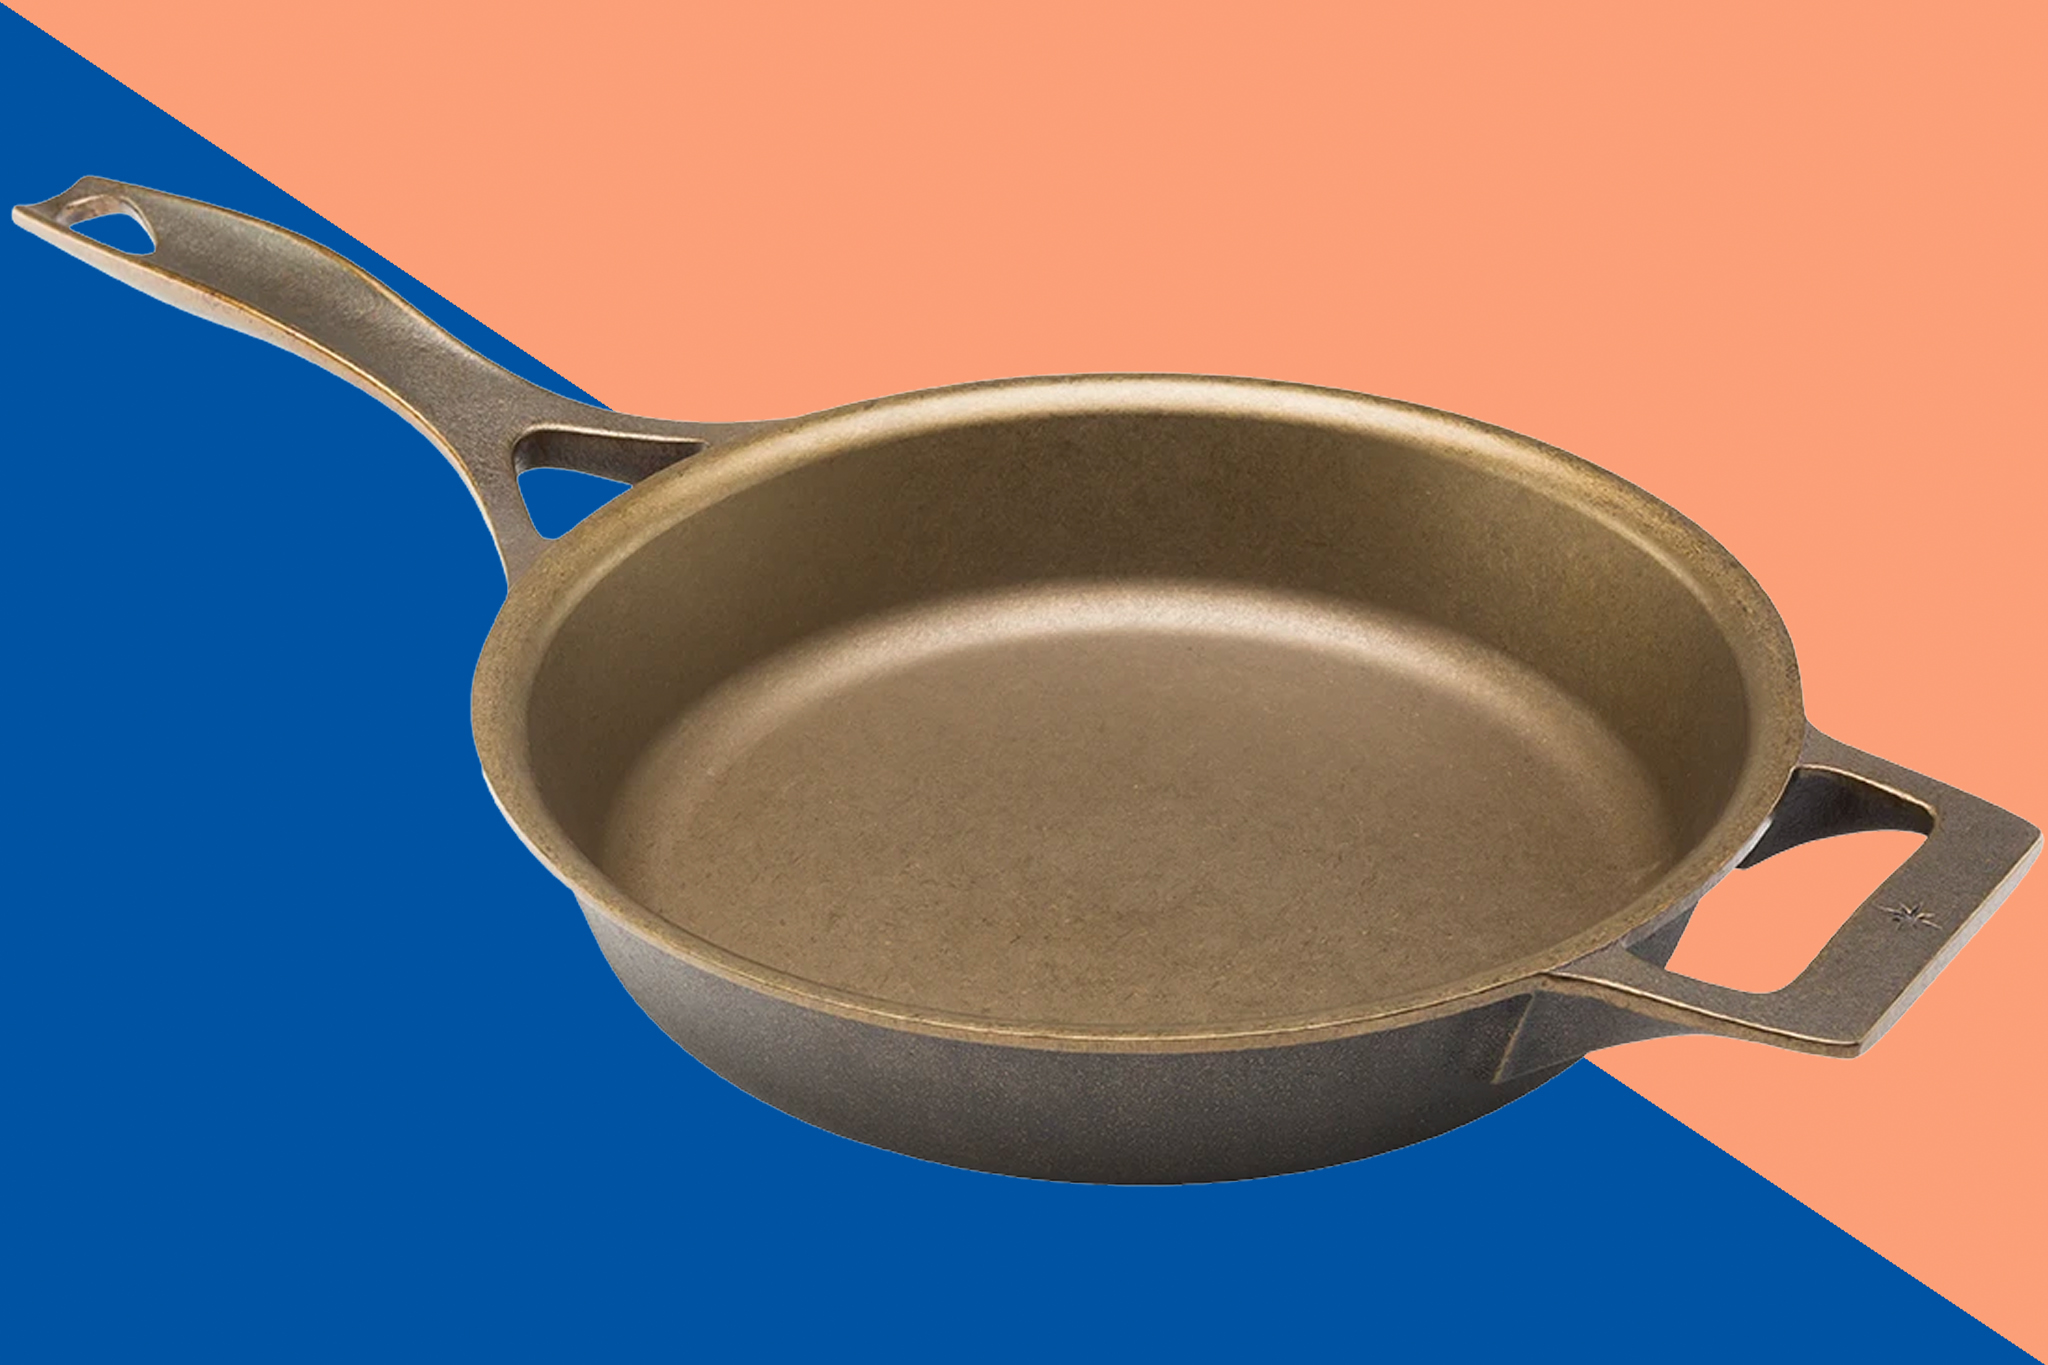 I tried my first high-end cast iron skillet and fell in love